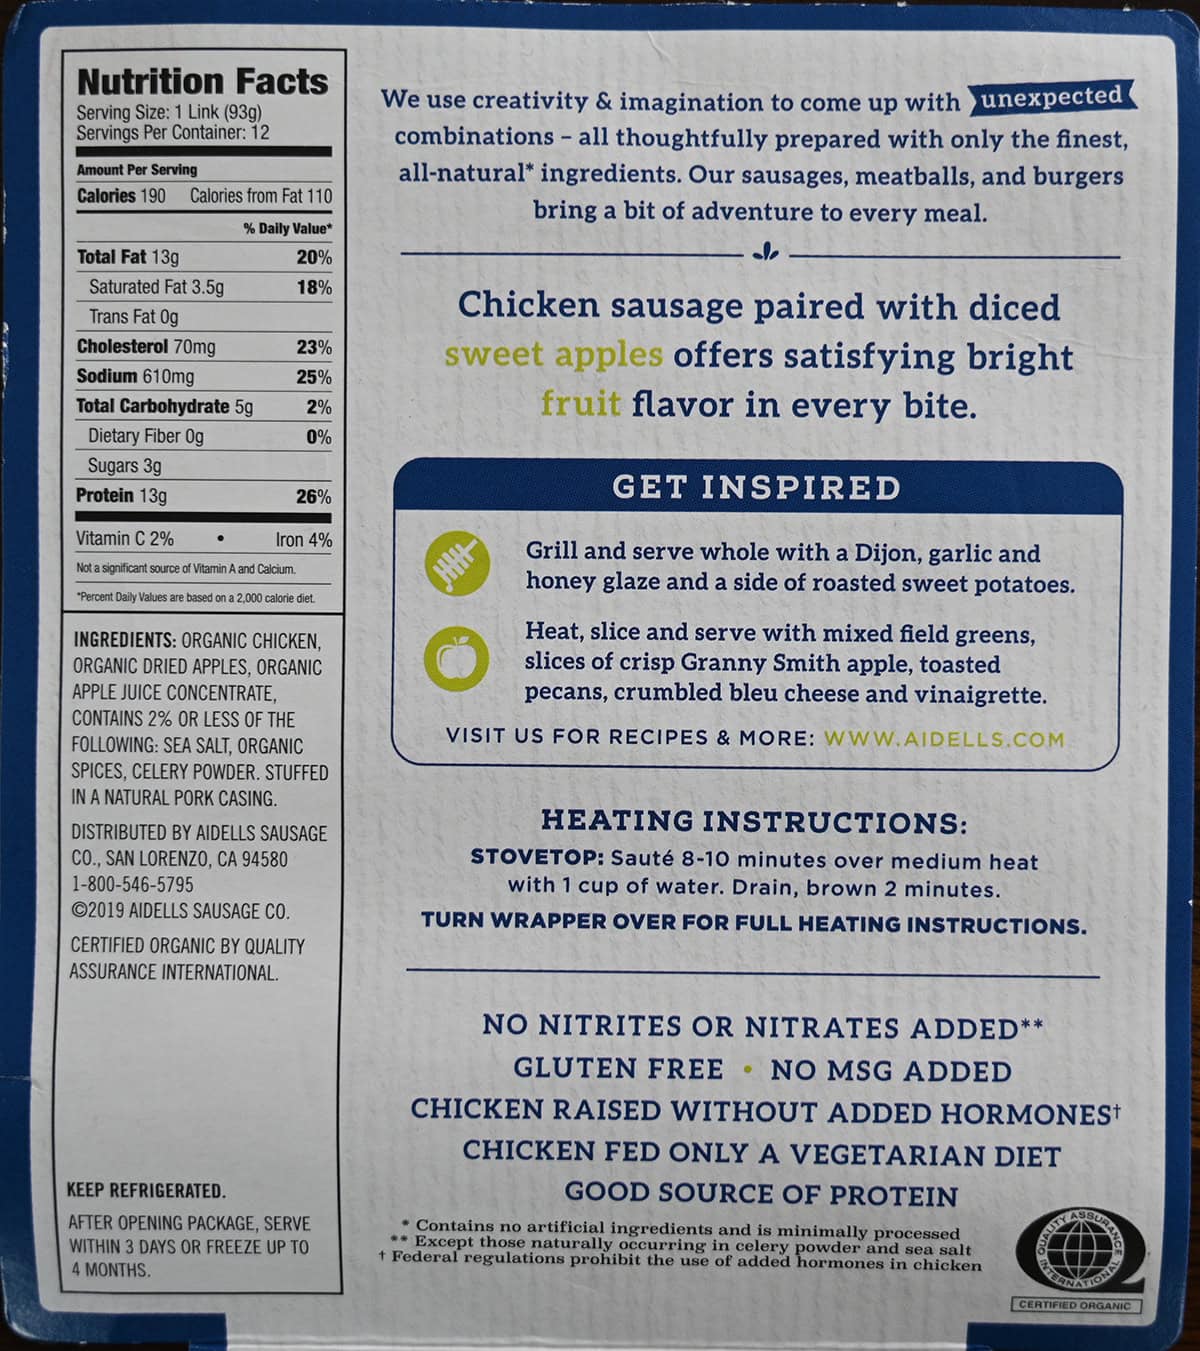 Image of the back of the sausage package showing ingredients, nutrition facts and heating instructions.